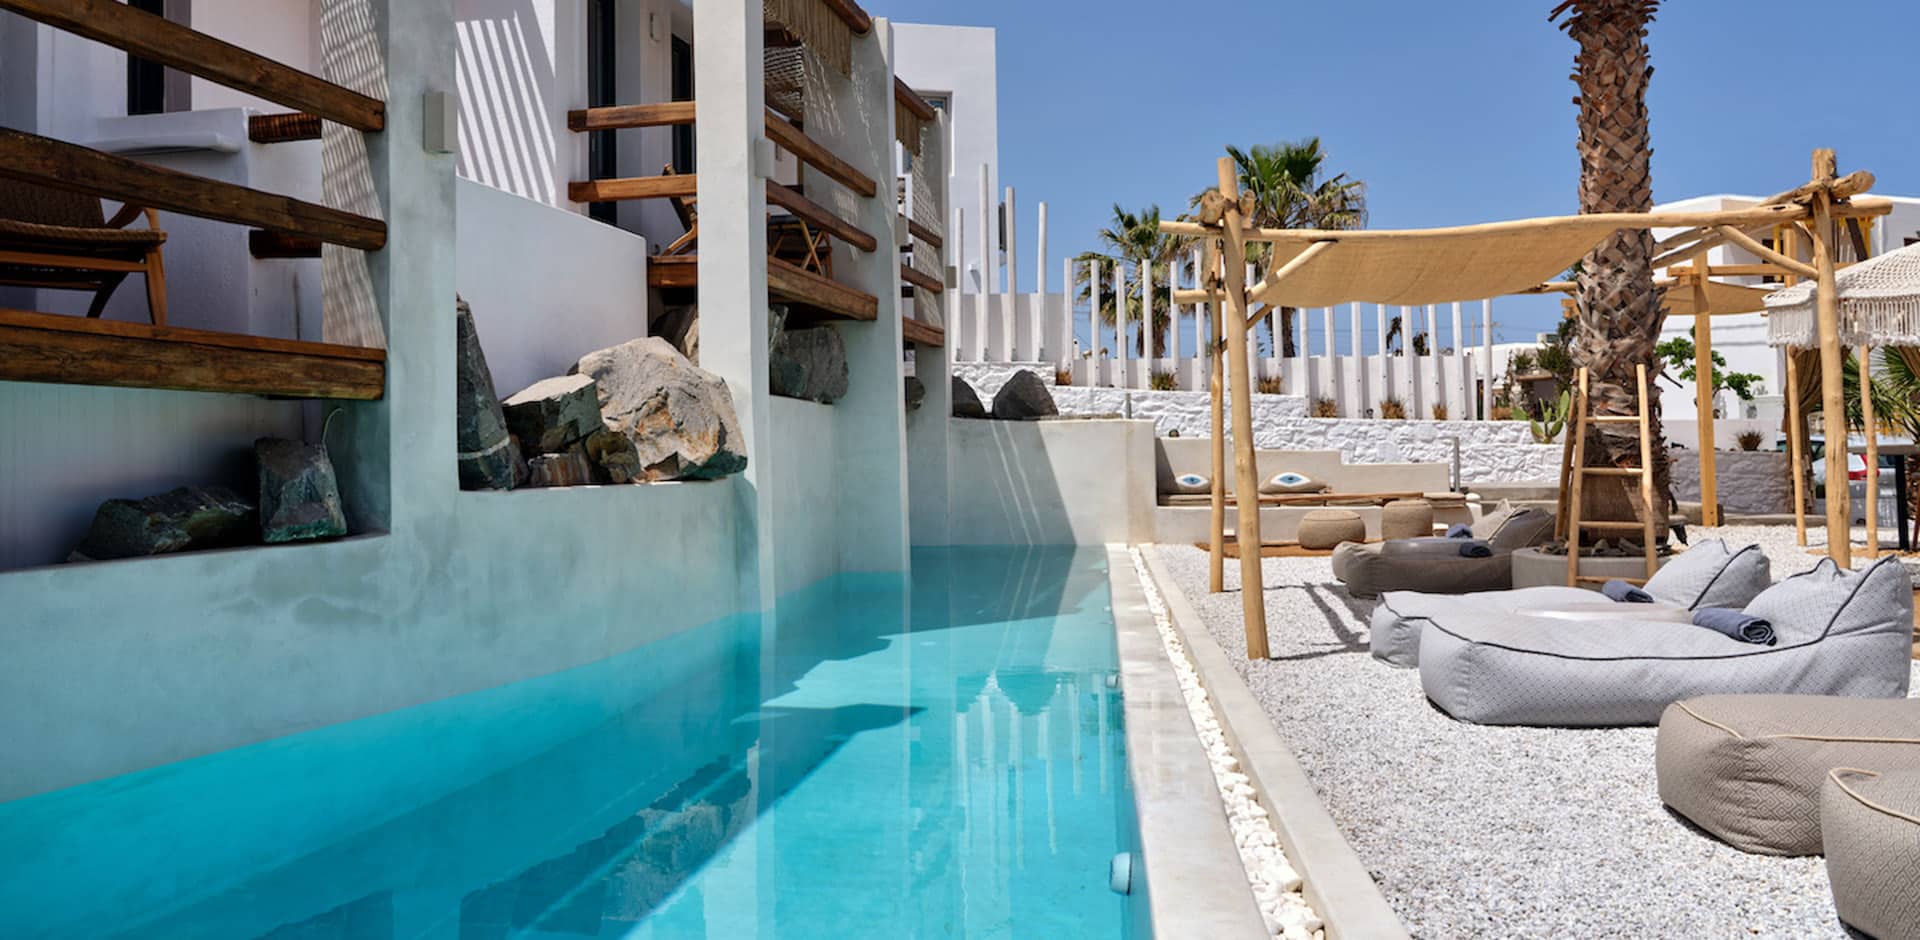 Secluded Hotel in Paros